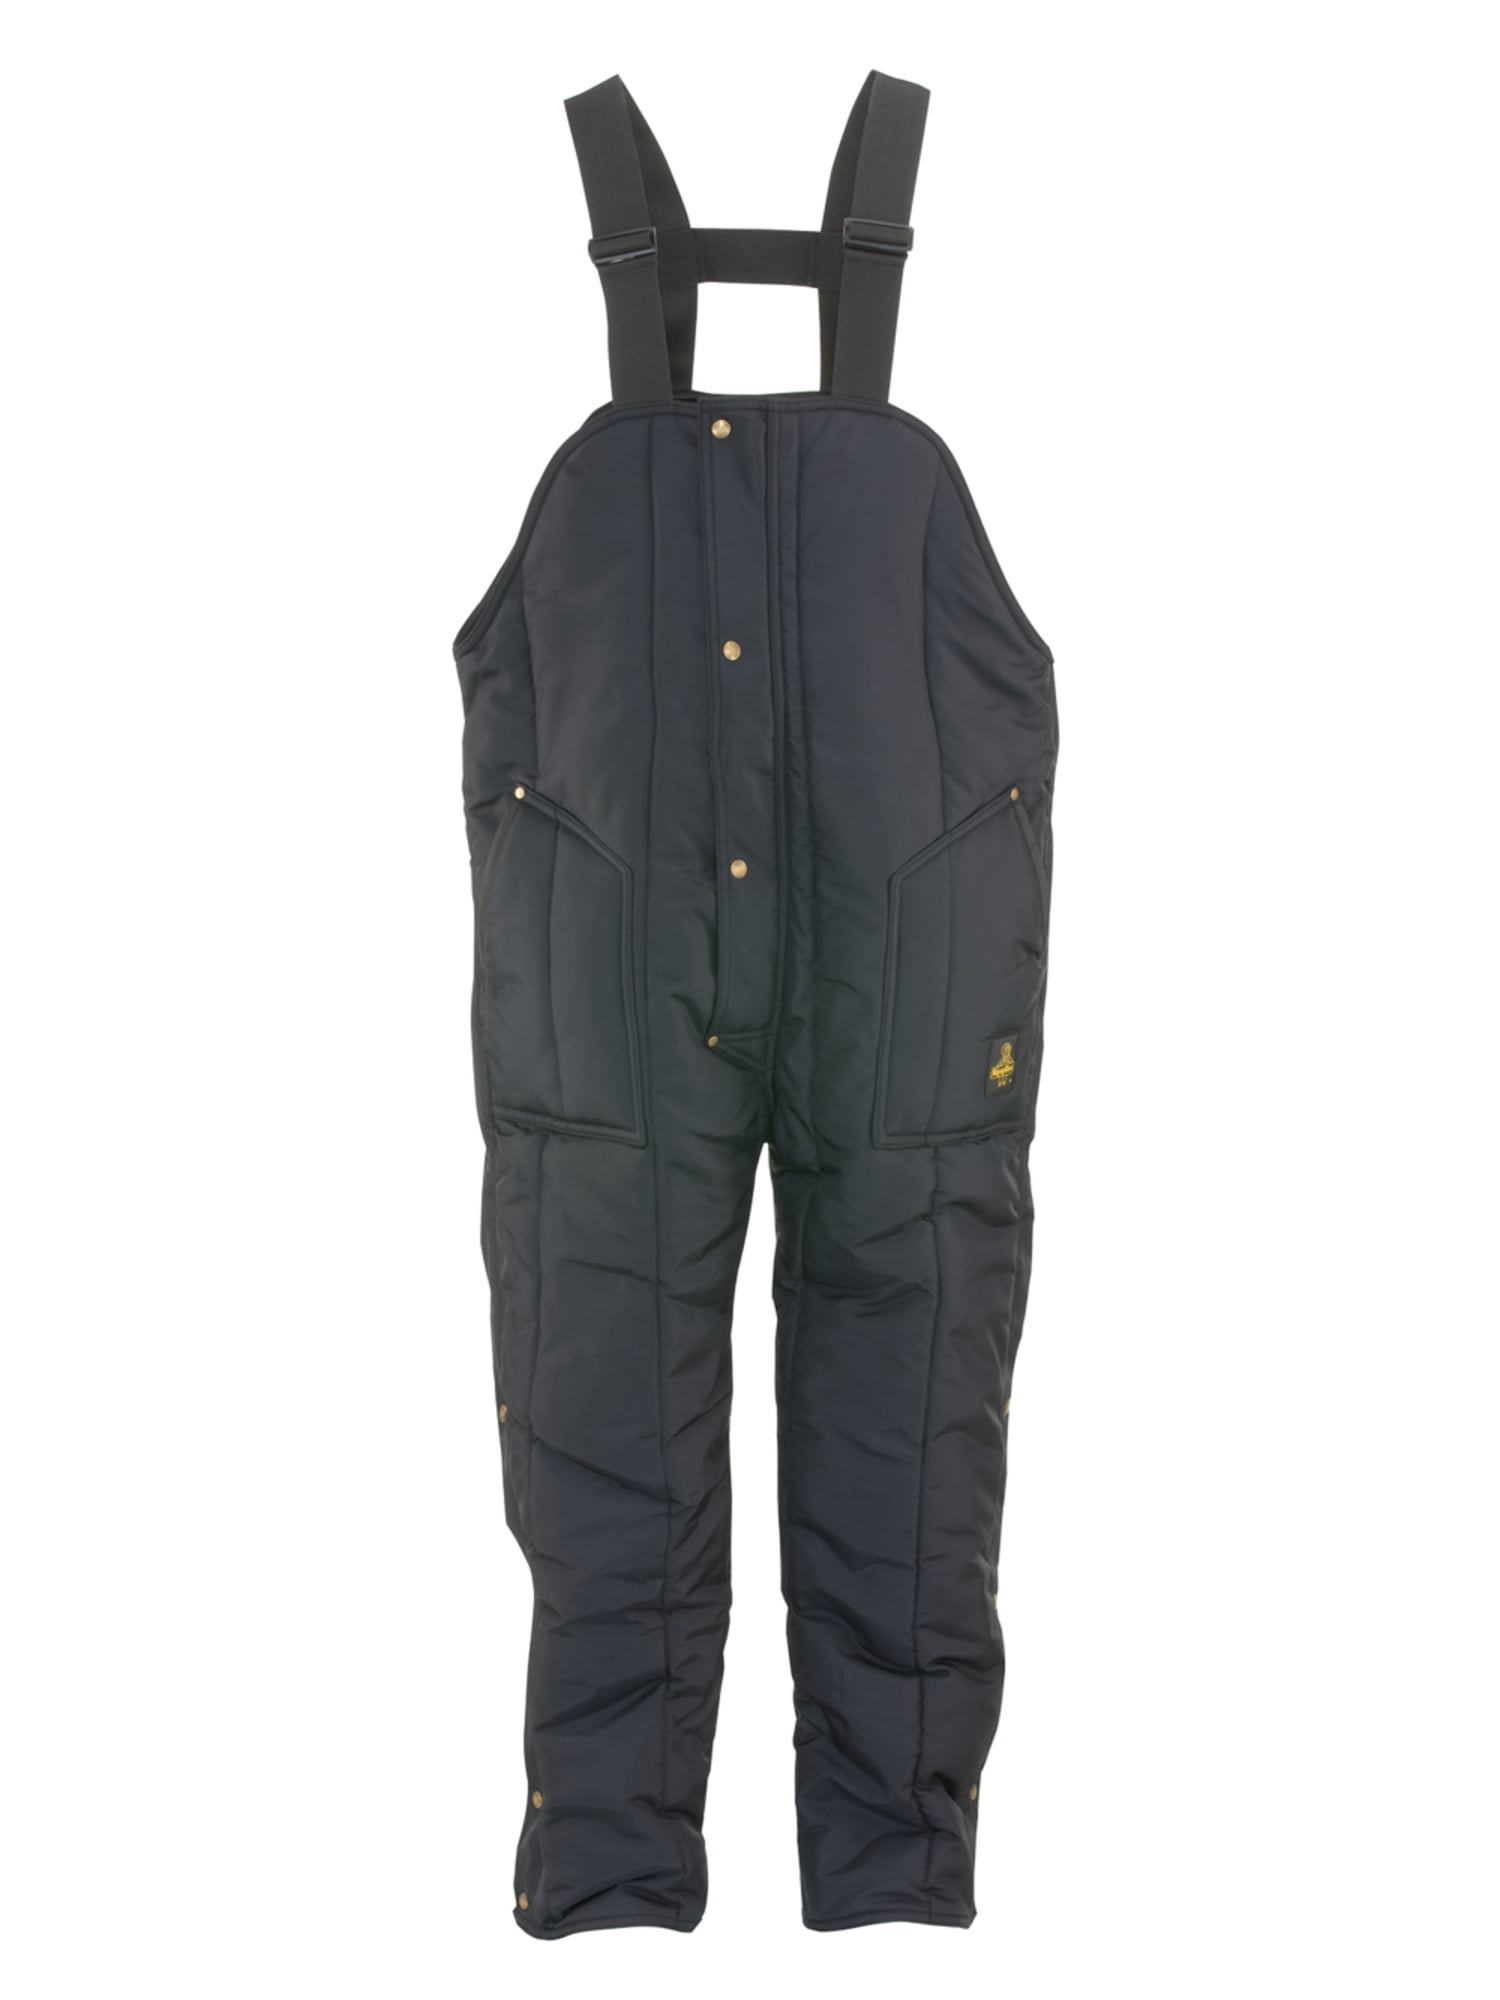 RefrigiWear Womens Diamond Quilted Insulated Bib Overalls with Performance-Flex 